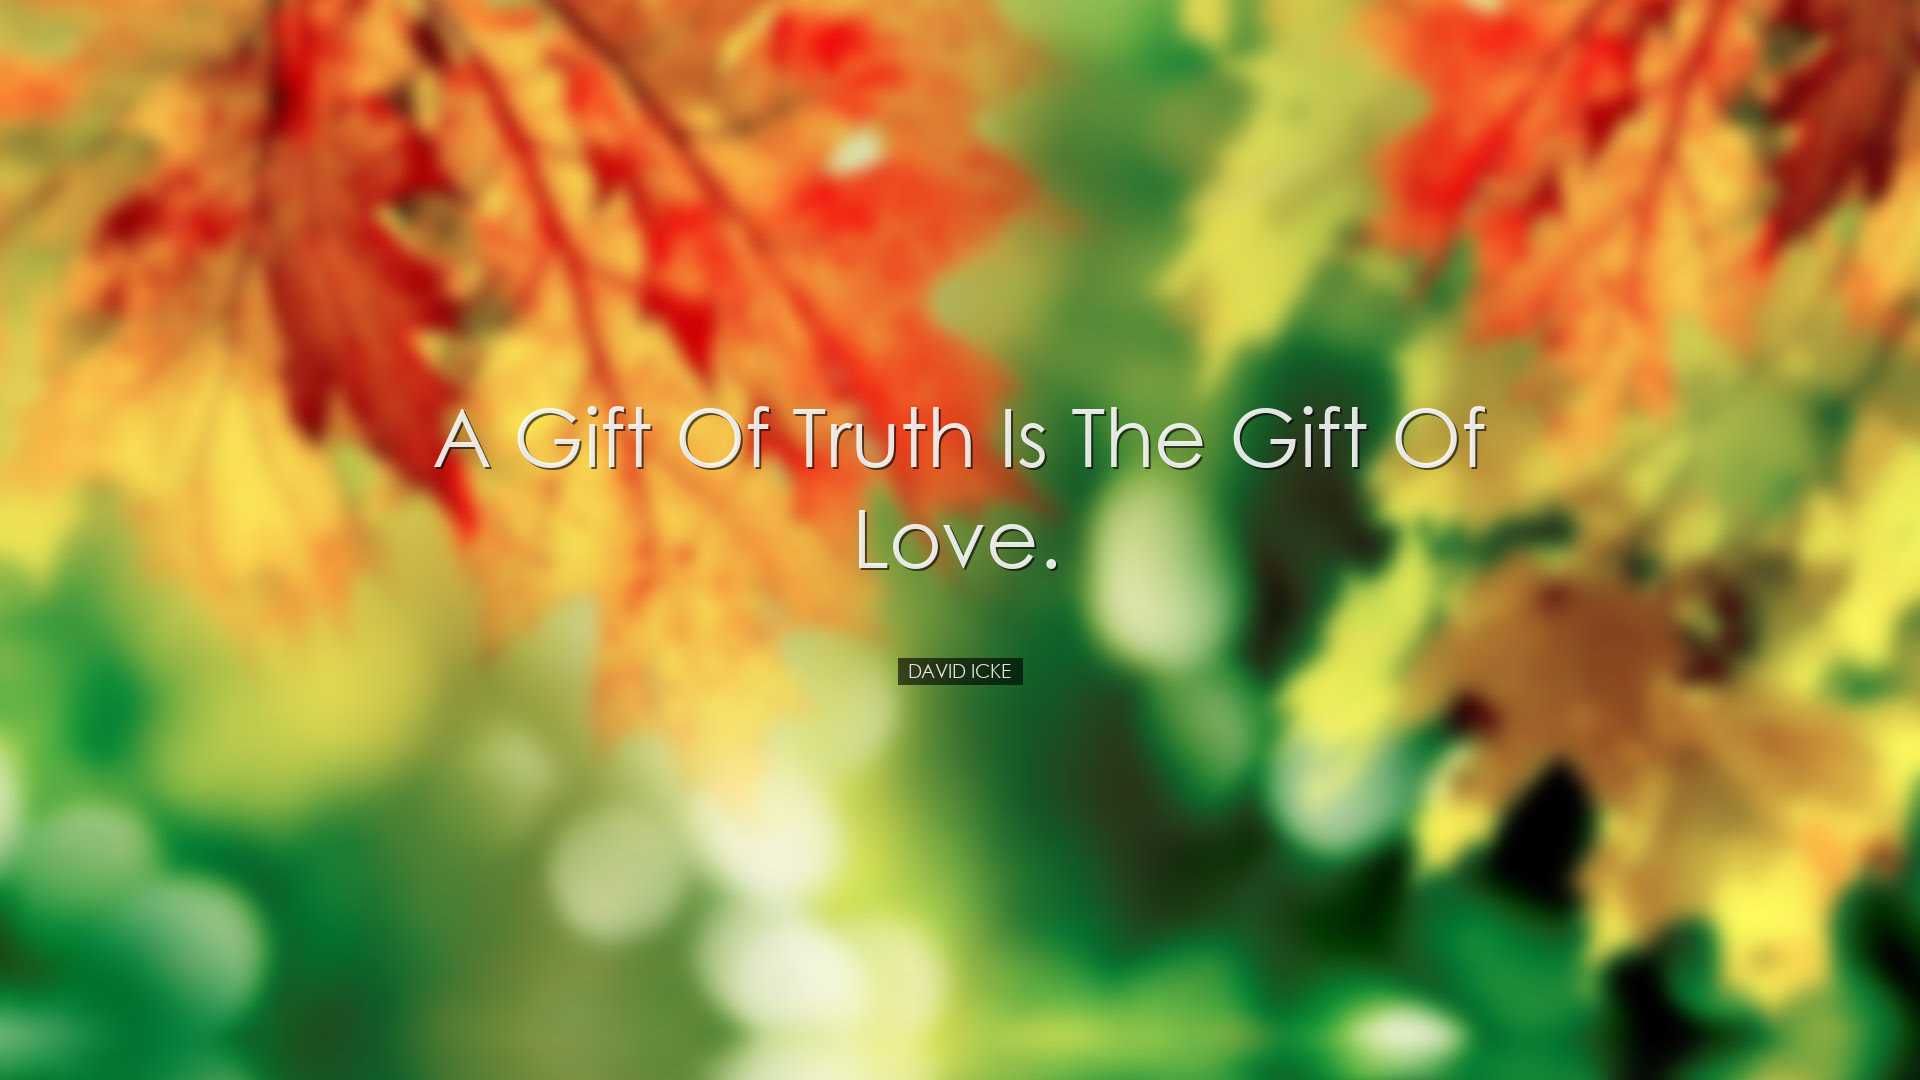 A gift of truth is the gift of love. - David Icke